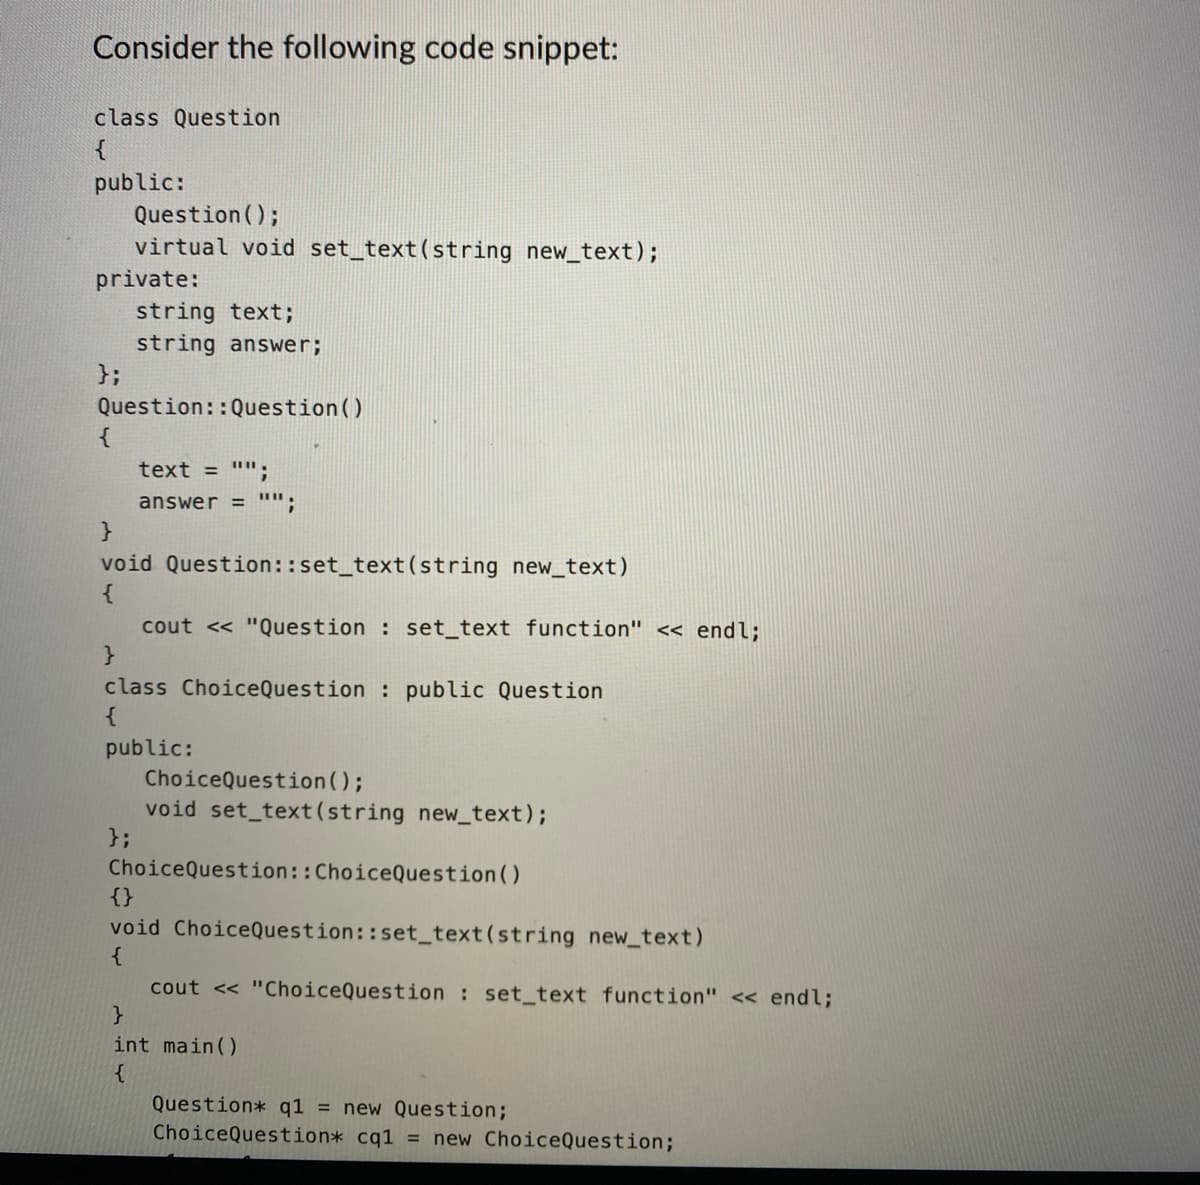 Consider the following code snippet:
class Question
{
public:
private:
};
Question();
virtual void set_text(string new_text);
{
string text;
string answer;
Question:: Question()
text = "";
answer = "";
}
void Question::set_text (string new_text)
{
cout << "Question : set_text function" << endl;
}
class ChoiceQuestion : public Question
public:
ChoiceQuestion();
void set_text (string new_text);
};
Choice Question:: ChoiceQuestion()
{}
void ChoiceQuestion::set_text(string new_text)
{
cout << "ChoiceQuestion set_text function" << endl;
}
int main()
{
Question* q1 = new Question;
ChoiceQuestion* cq1 = new ChoiceQuestion;